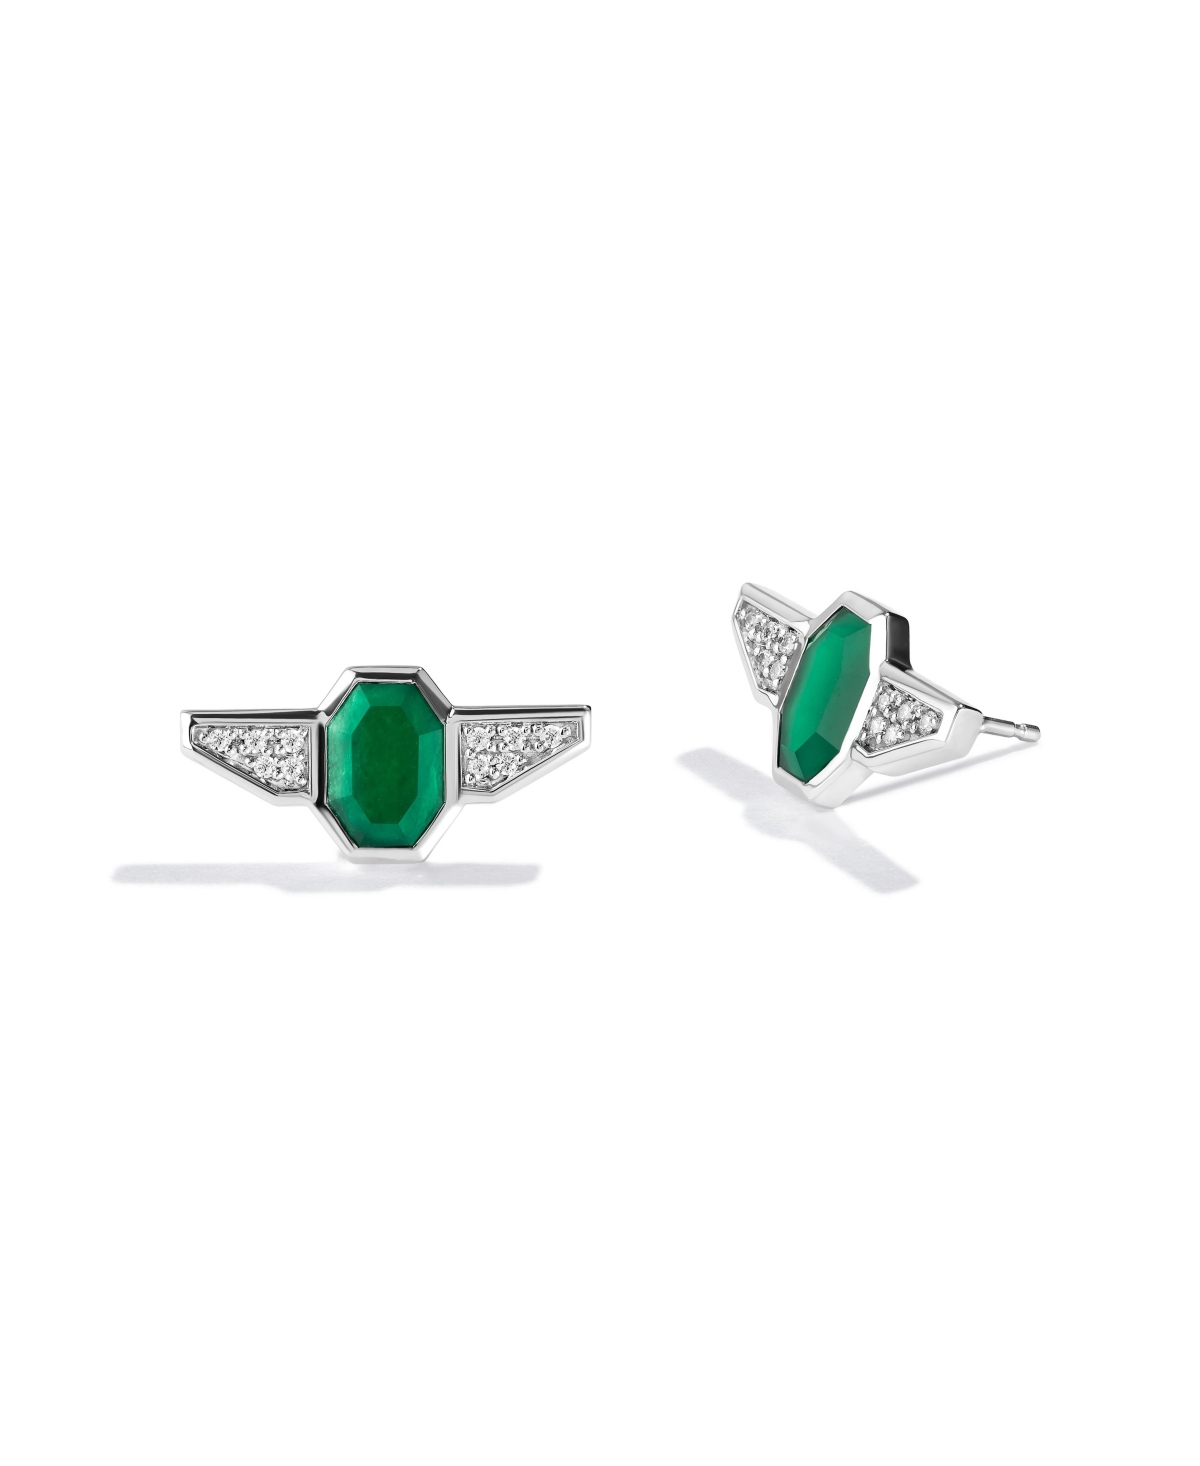 The Jedi Master Diamond and Green Agate Stud Earrings (1/10 ct. t.w.) in Sterling Silver - Sterling Silver